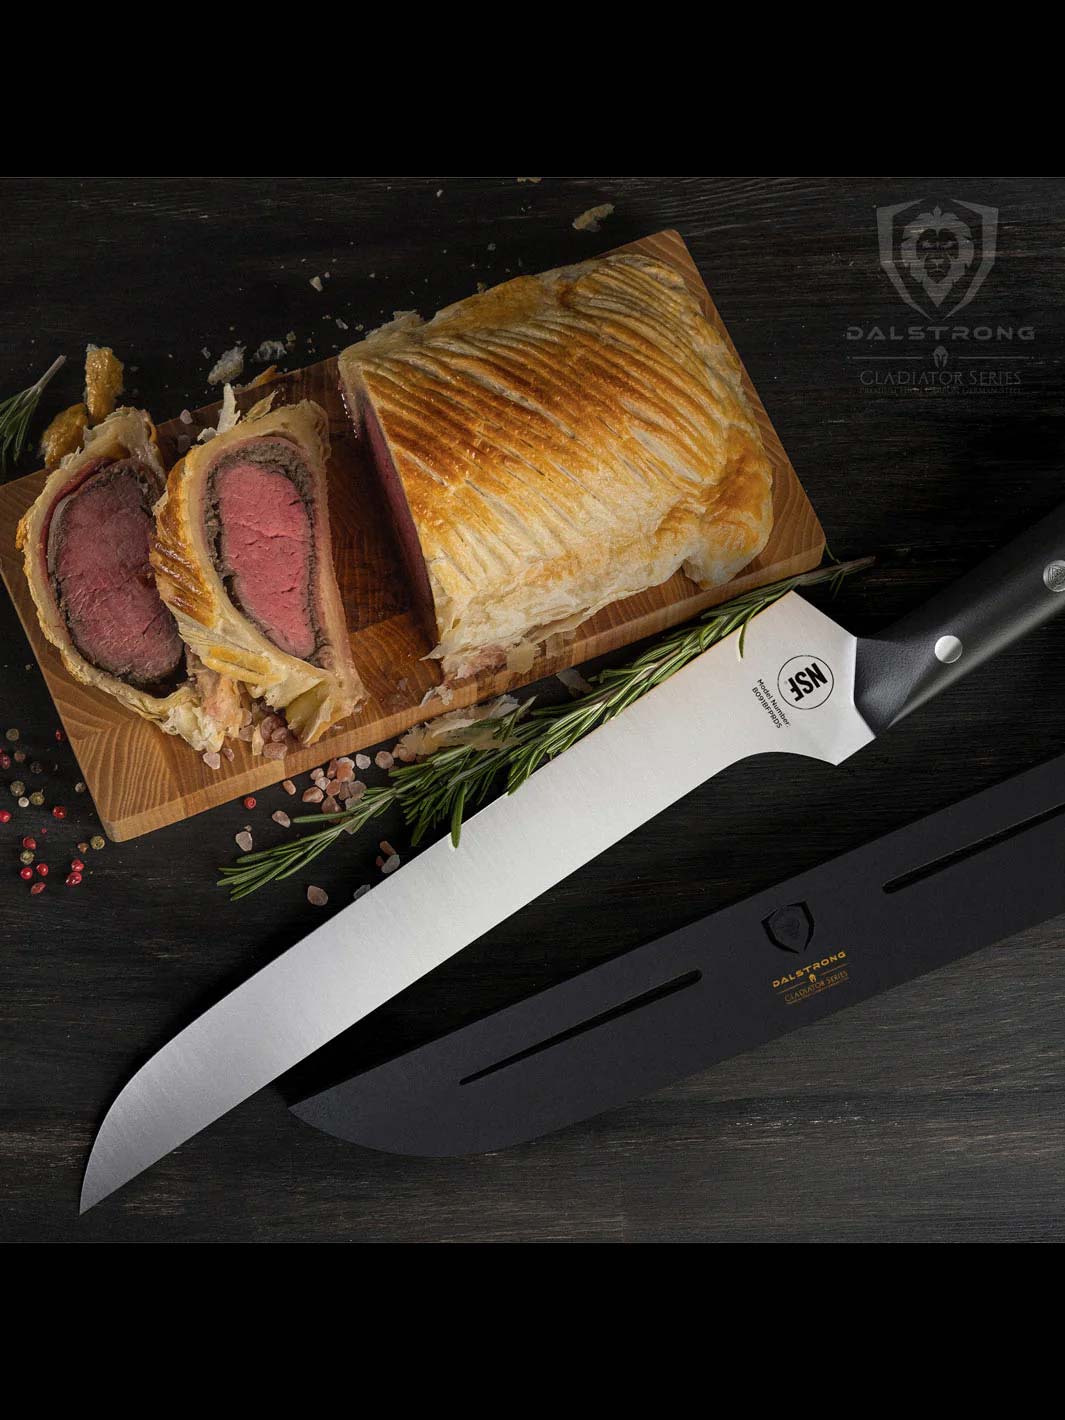 Dalstrong gladiator series 12 inch offset slicer knife with black handle and sheath beside sliced beef wellington.